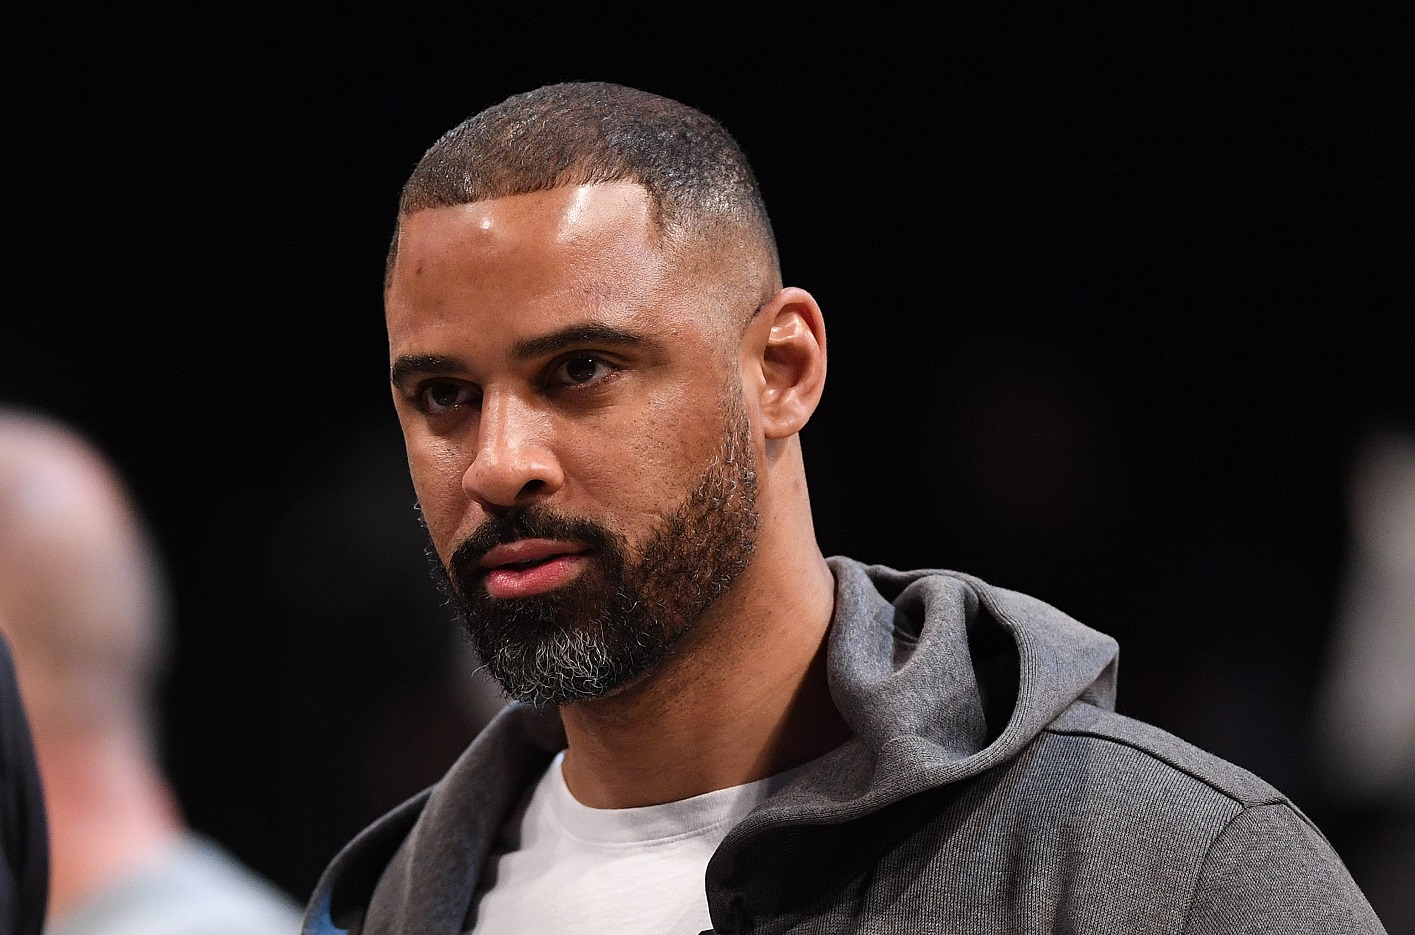 New Boston Celtics coach Ime Udoka looks on from courtside before an NBA game at Barclays Center on Dec. 15, 2019.